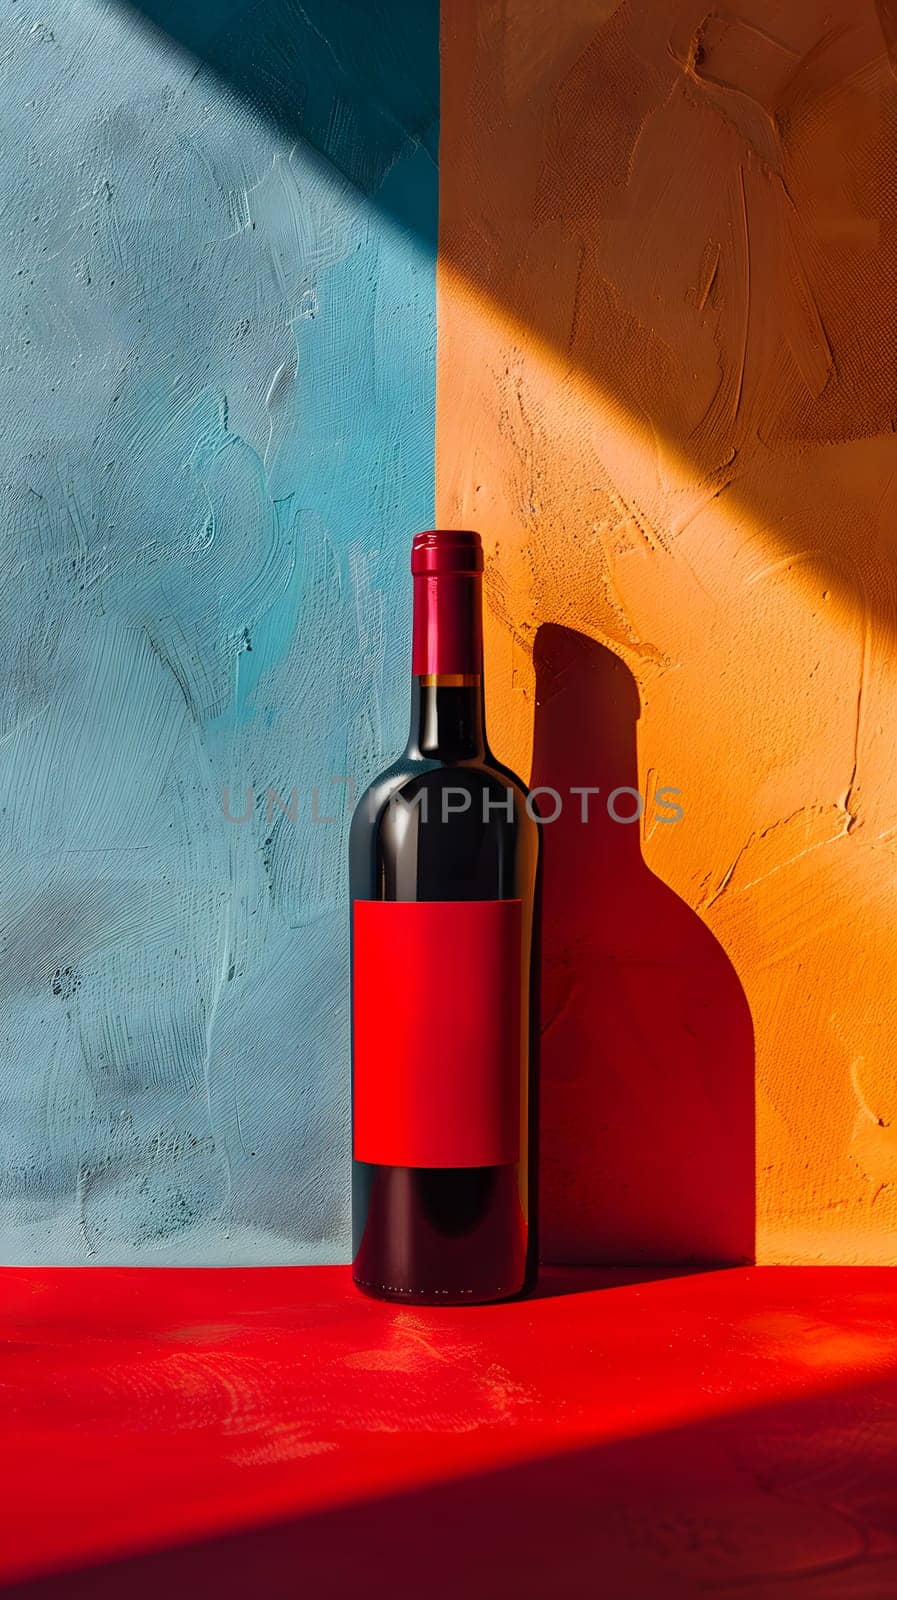 A glass bottle of red wine is placed on a red table, sealed with a cork bottle stopper saver. The liquid inside is a delightful fluid perfect for a relaxing drink